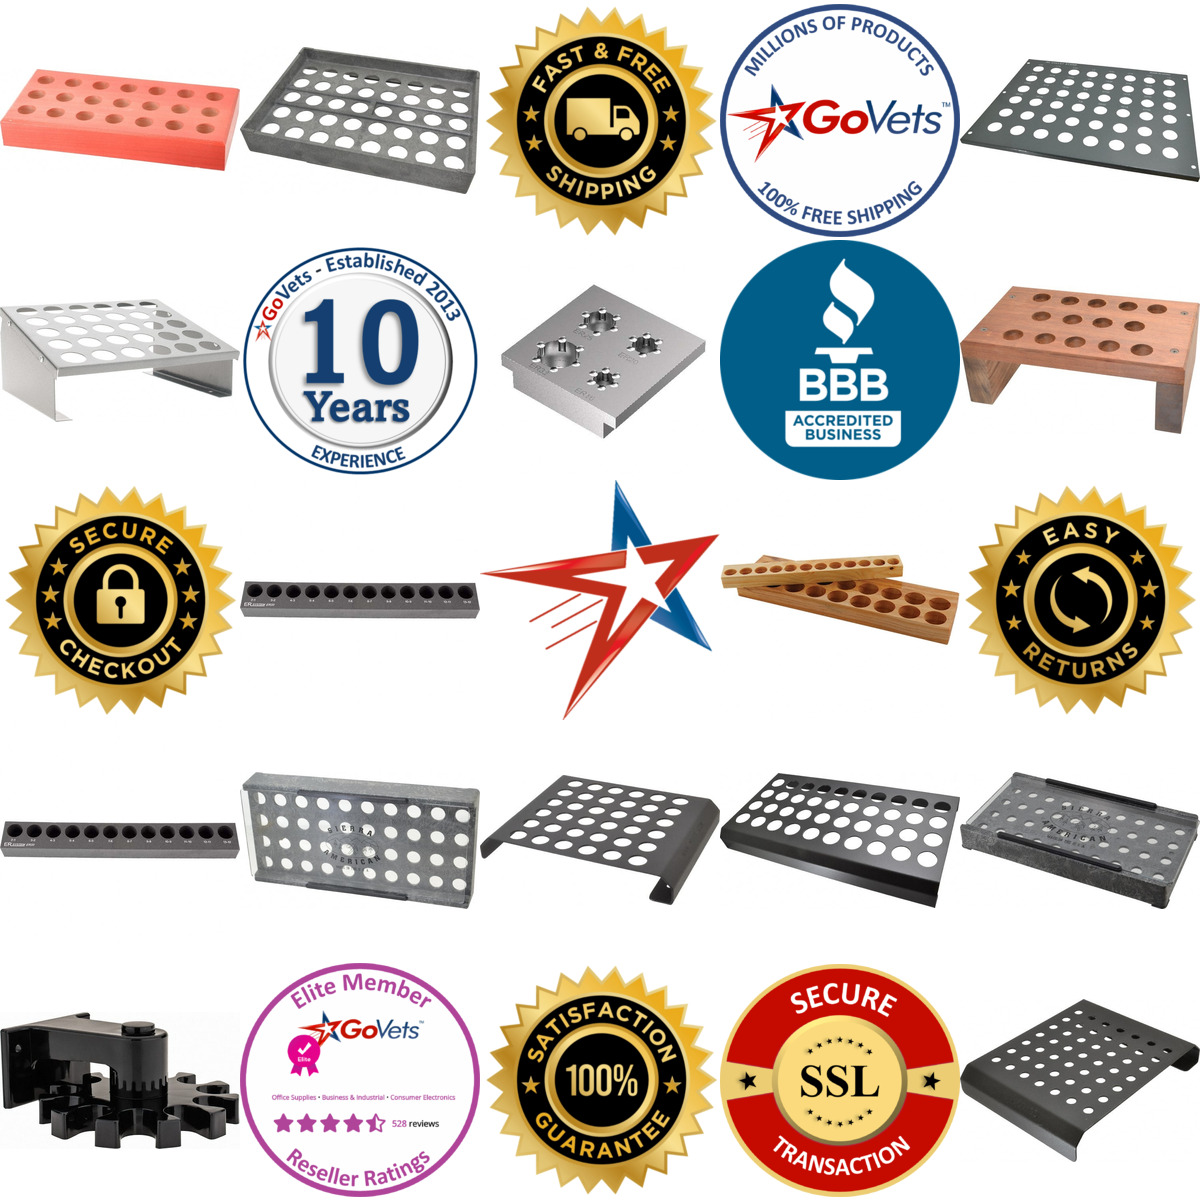 A selection of Collet Racks and Trays products on GoVets